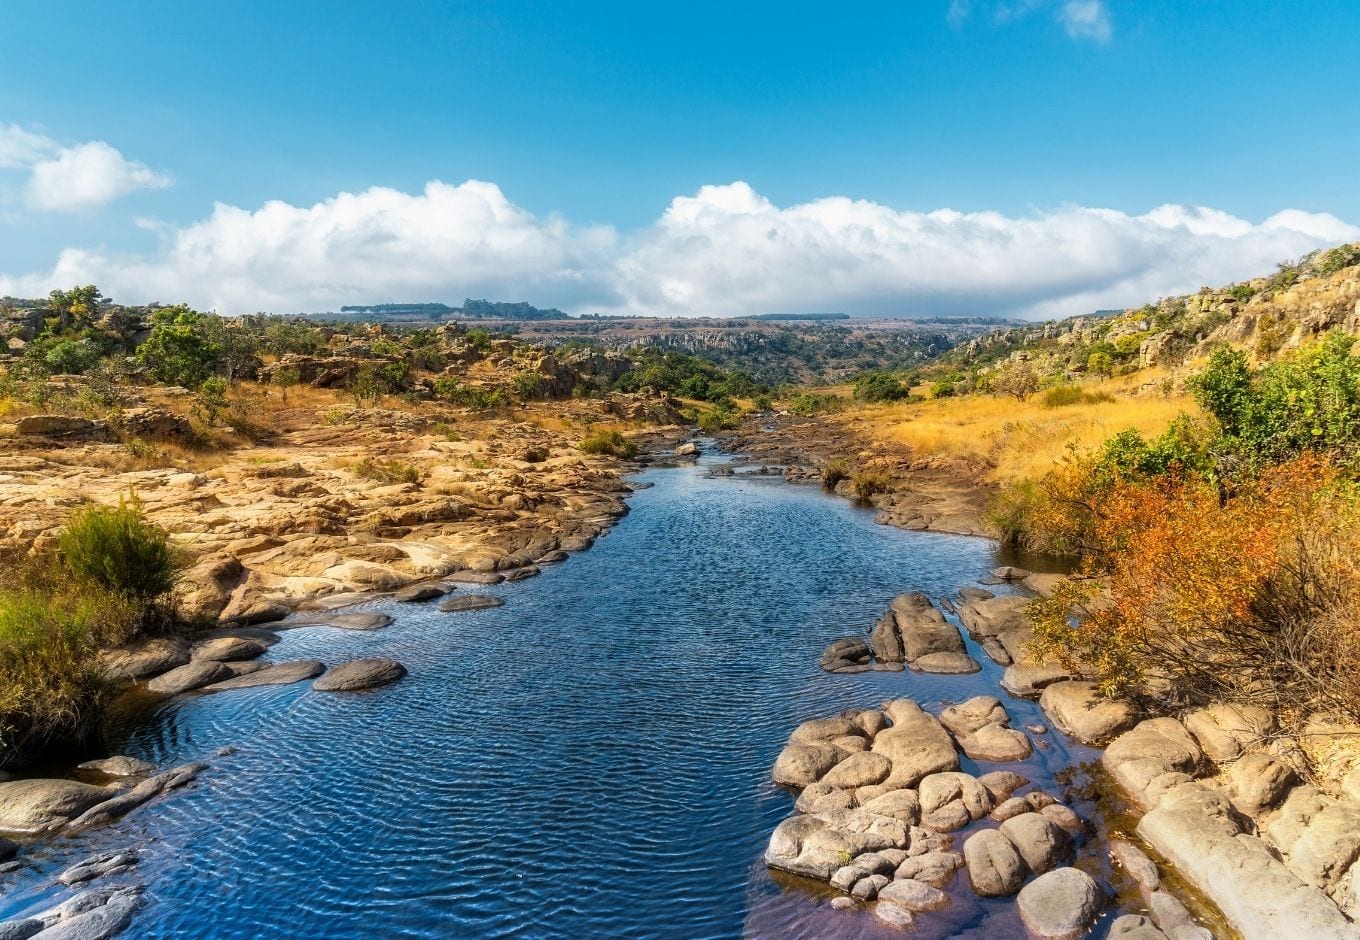 A small lagoon surrounded by rocks at the Panorama Route, in South Africa.